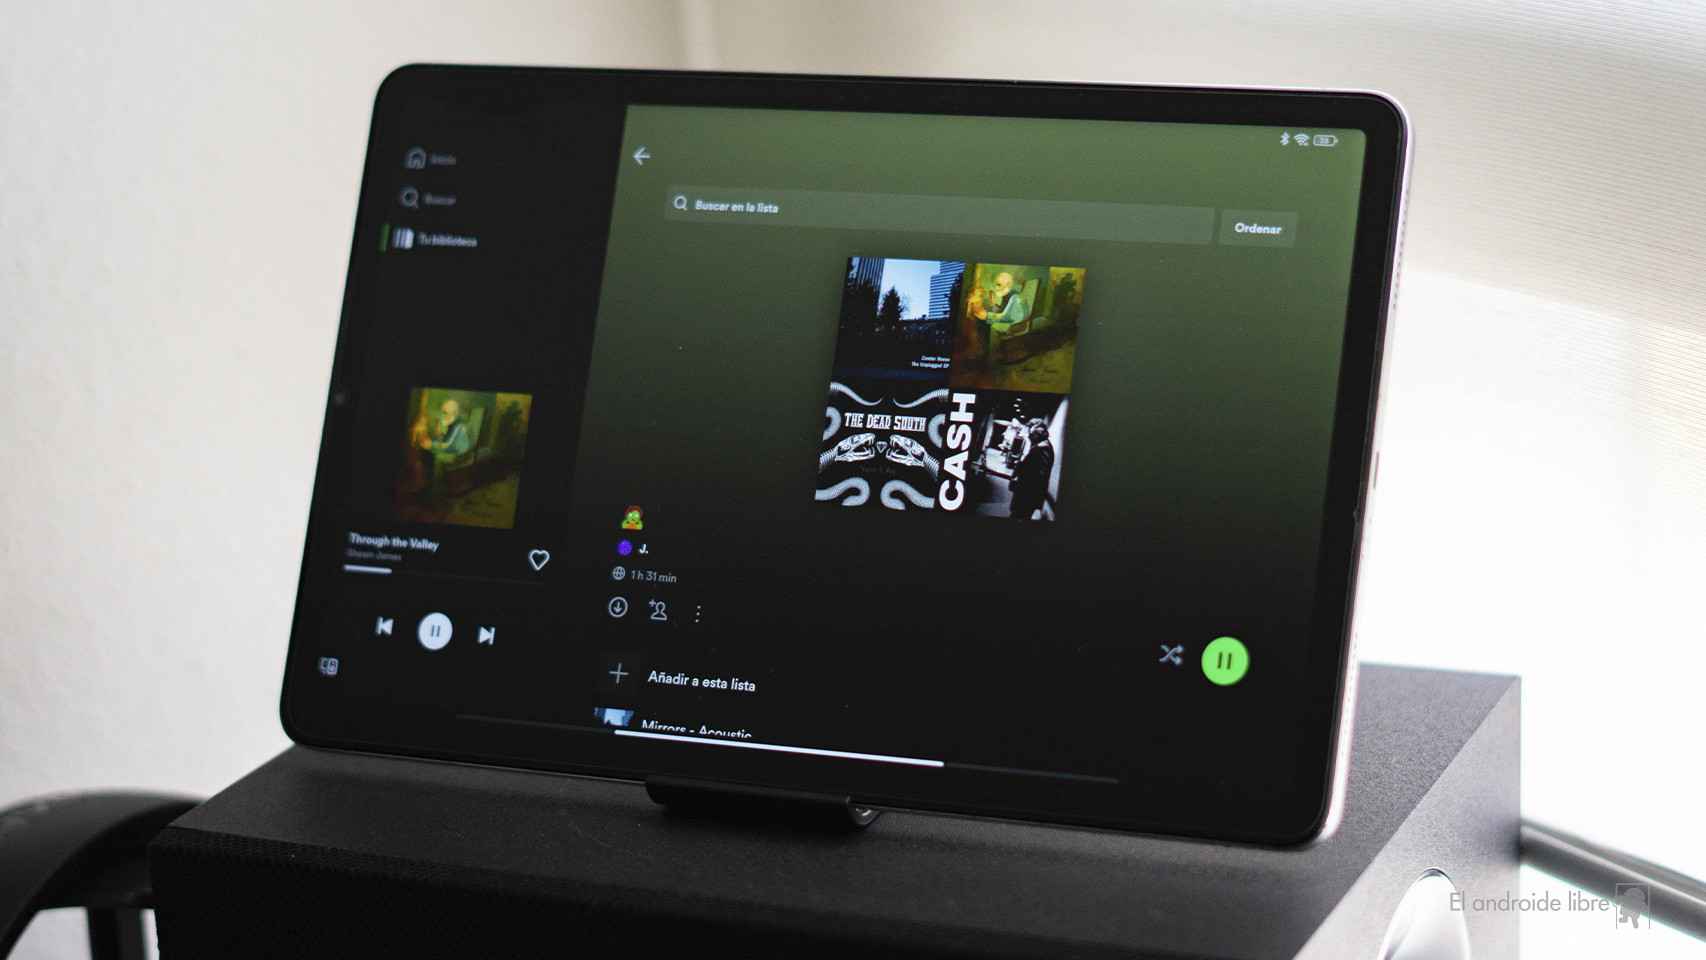 Spotify works on Android TV